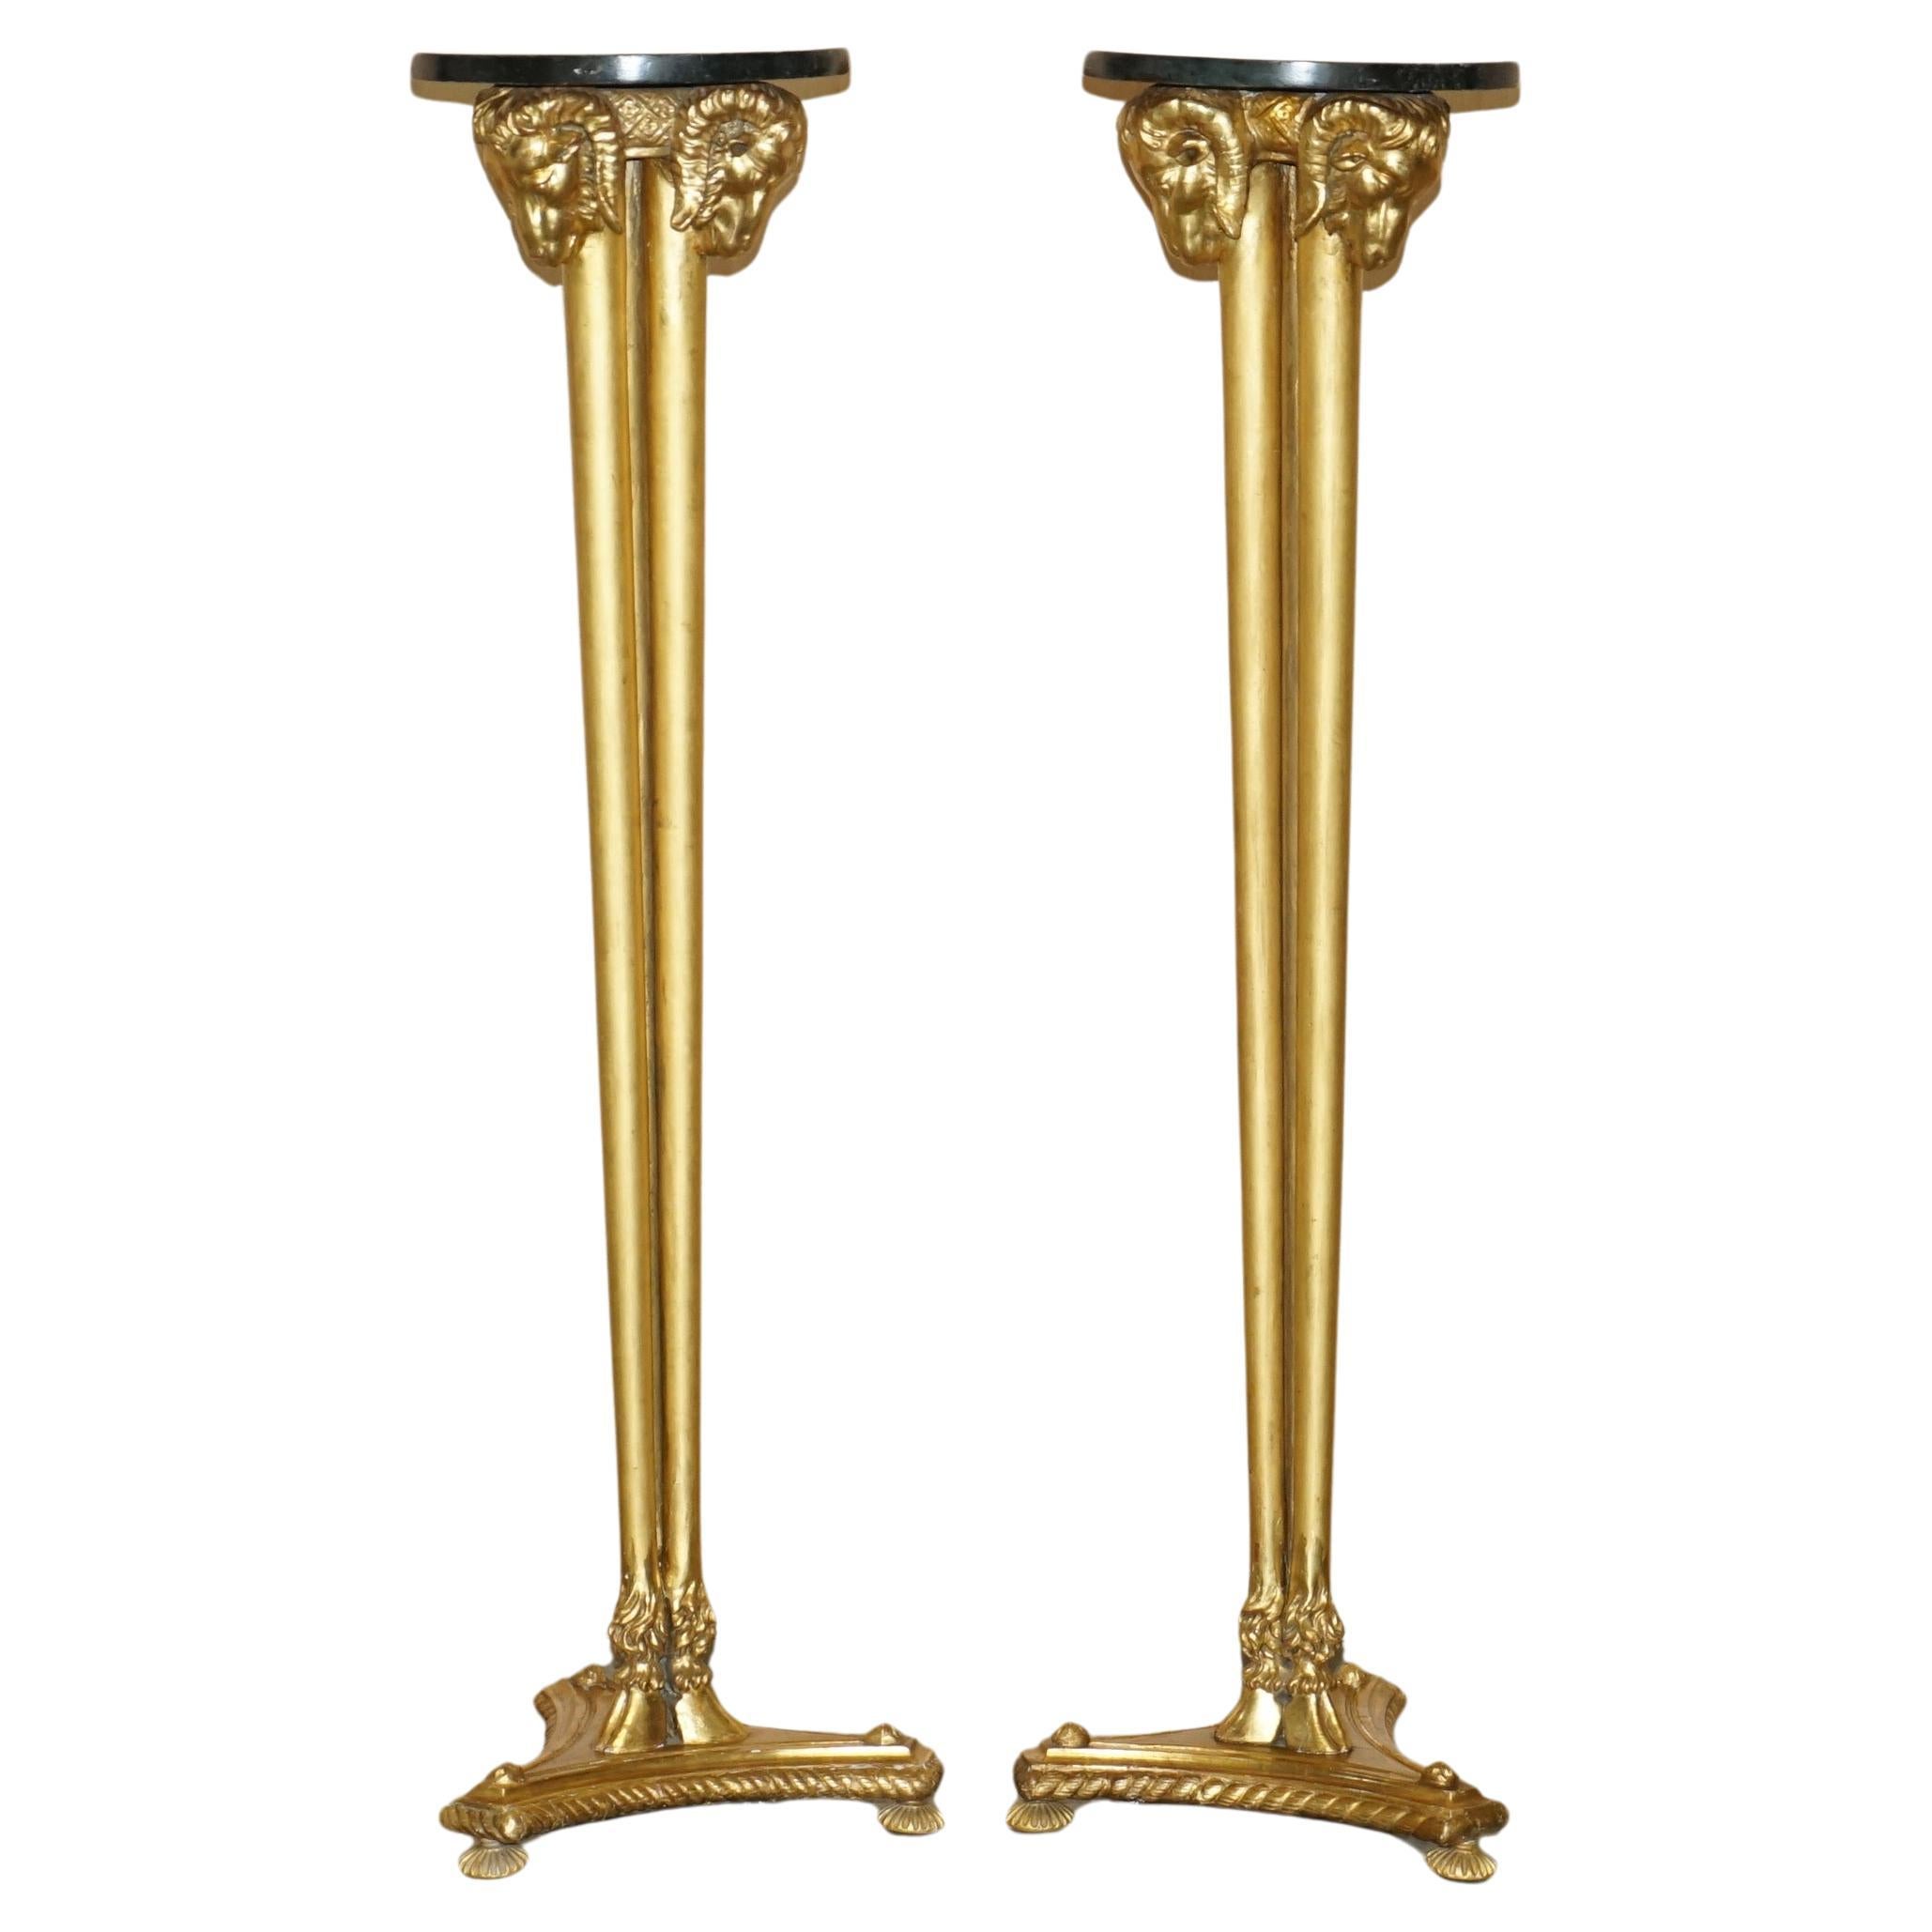 PAIR OF VINTAGE GOLD GILT RAMS HEAD & HOOF TALL TORCHIERE JARDINIERE STANDs For Sale